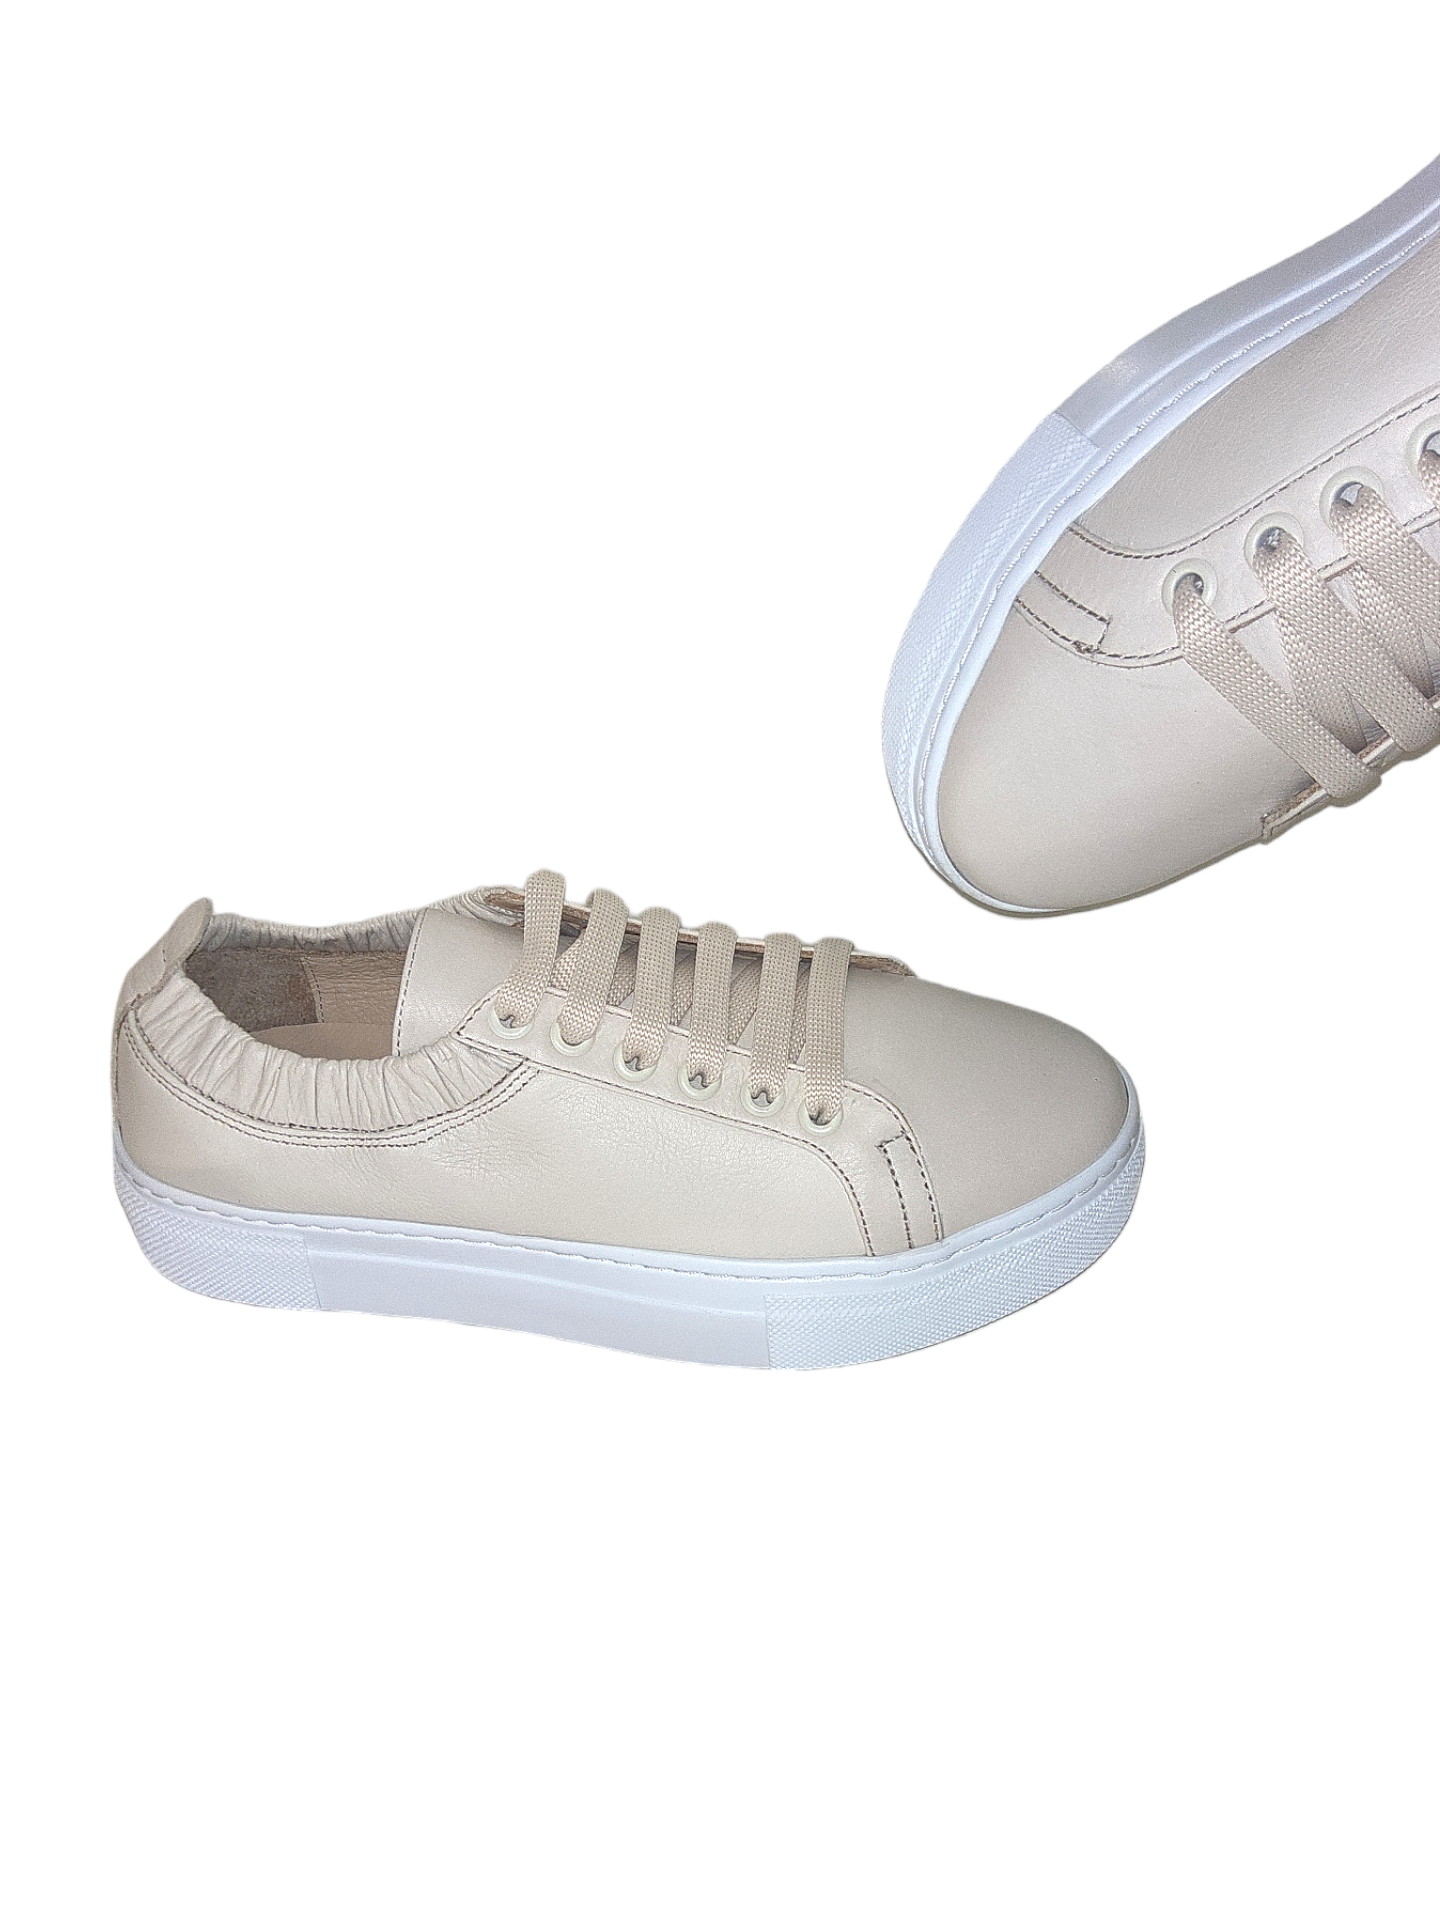 Cream leather sneakers